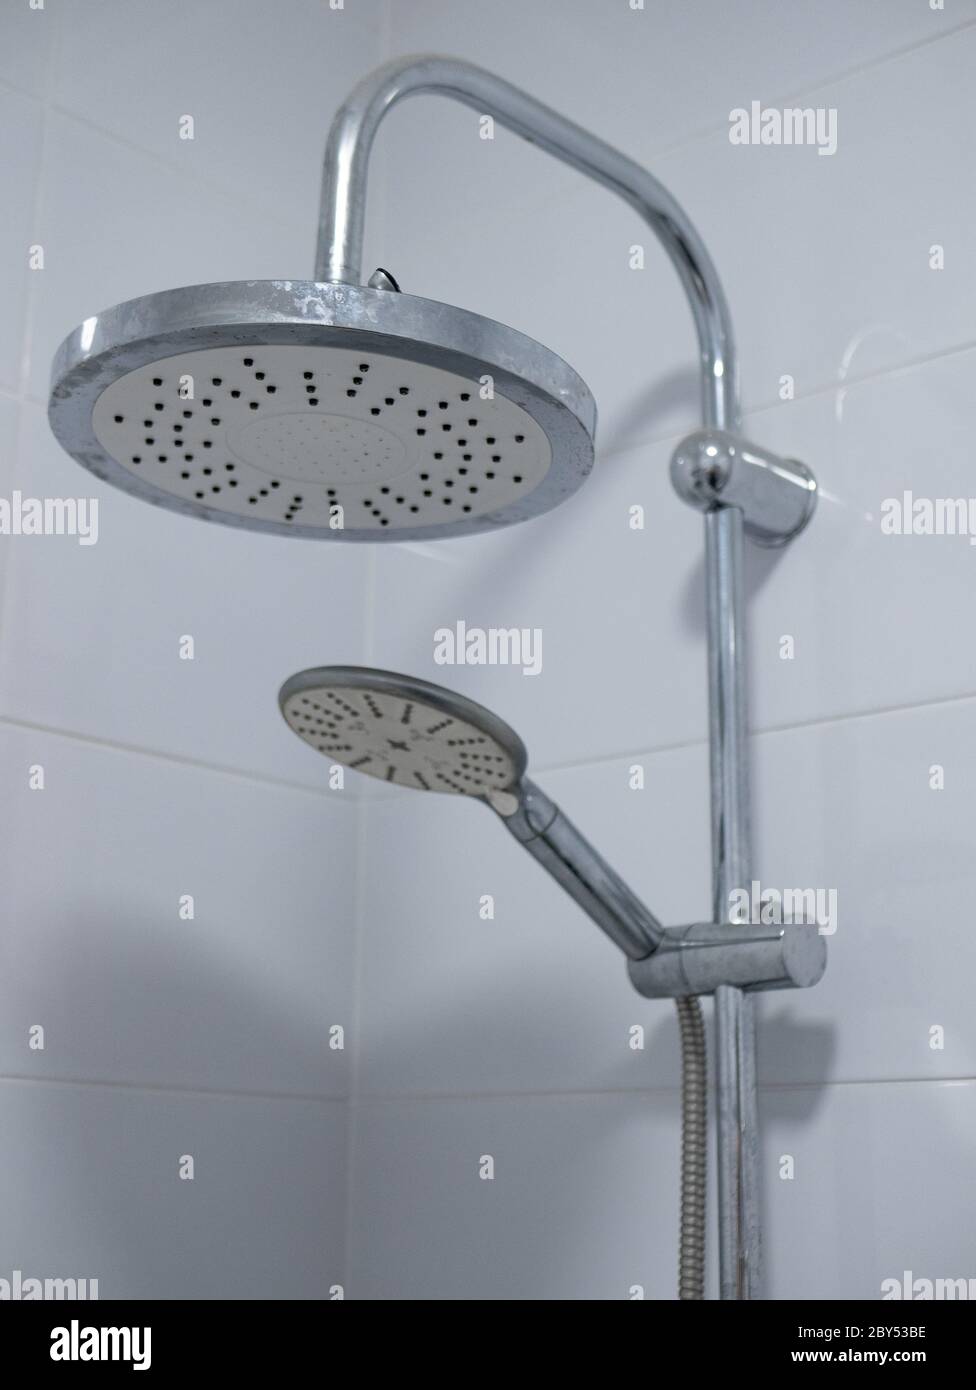 https://c8.alamy.com/comp/2BY53BE/close-up-image-of-two-shower-heads-in-white-tile-bathroom-large-is-mounted-on-metal-pipe-and-small-attached-to-flexible-hose-2BY53BE.jpg